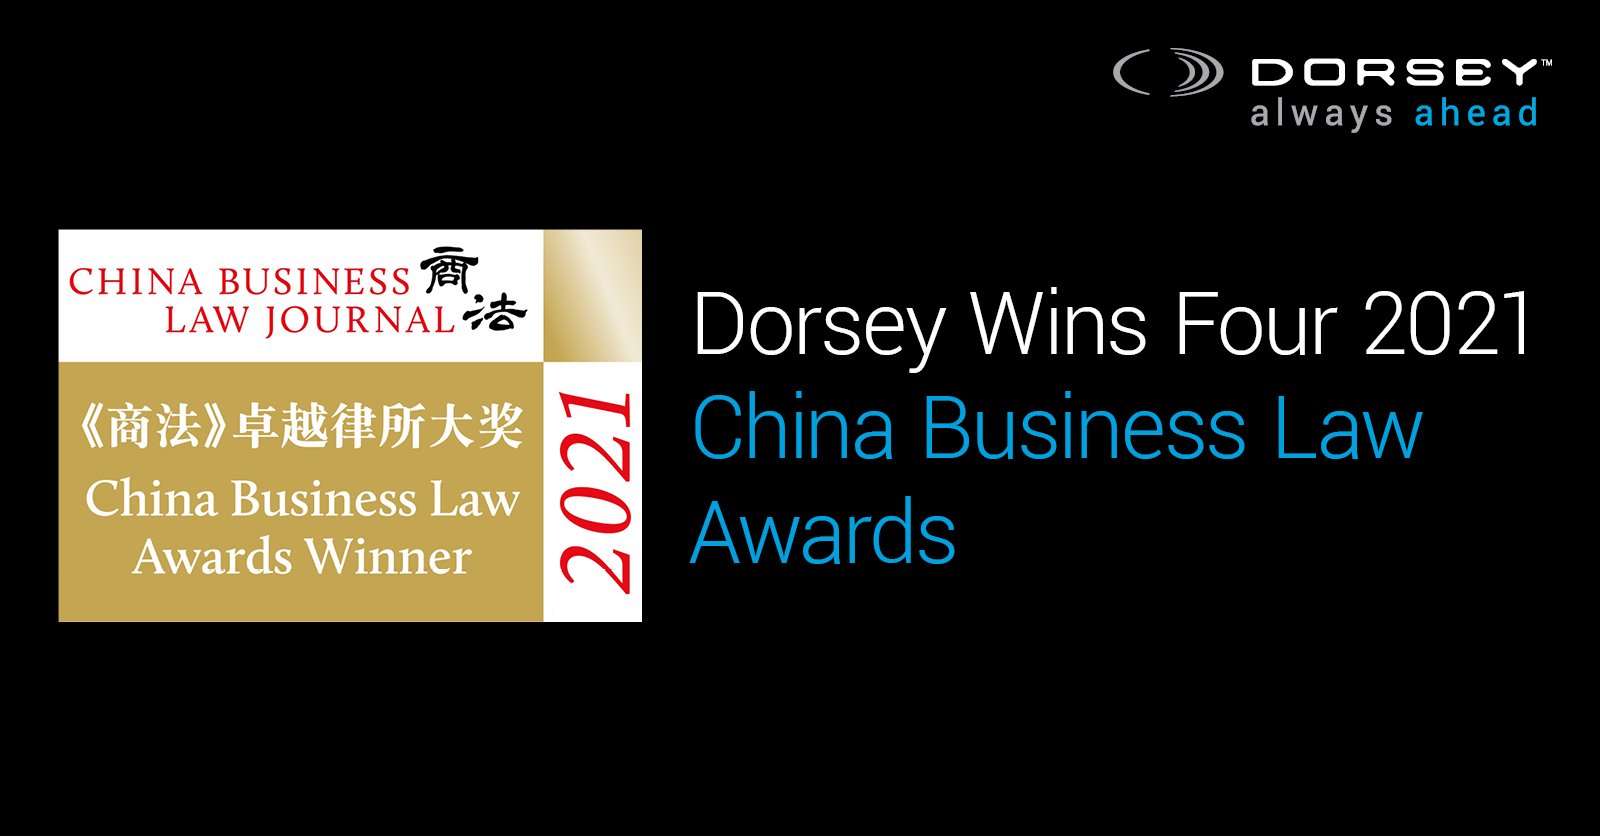 China Business Law Awards 2021